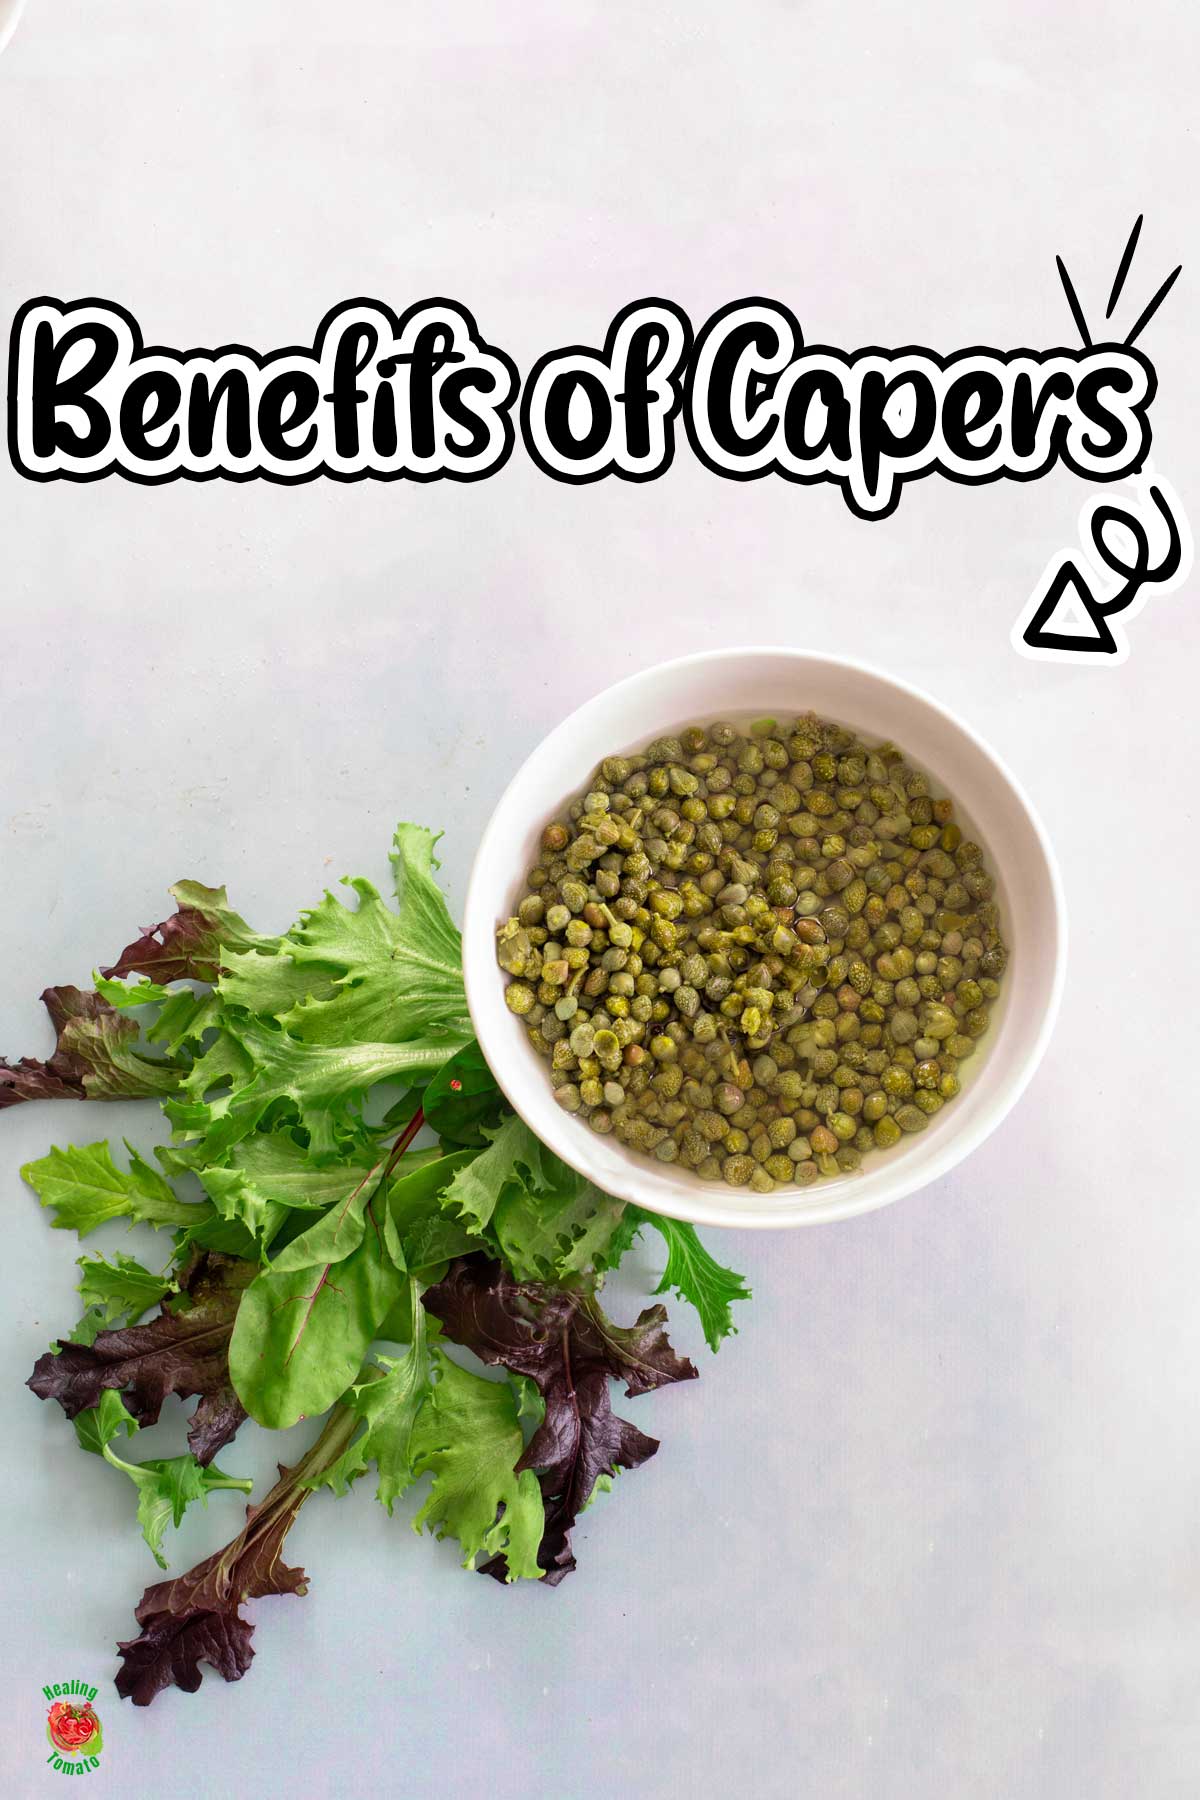 Top view of capers in a white bowl. On the bottom left side, there are a few greens.